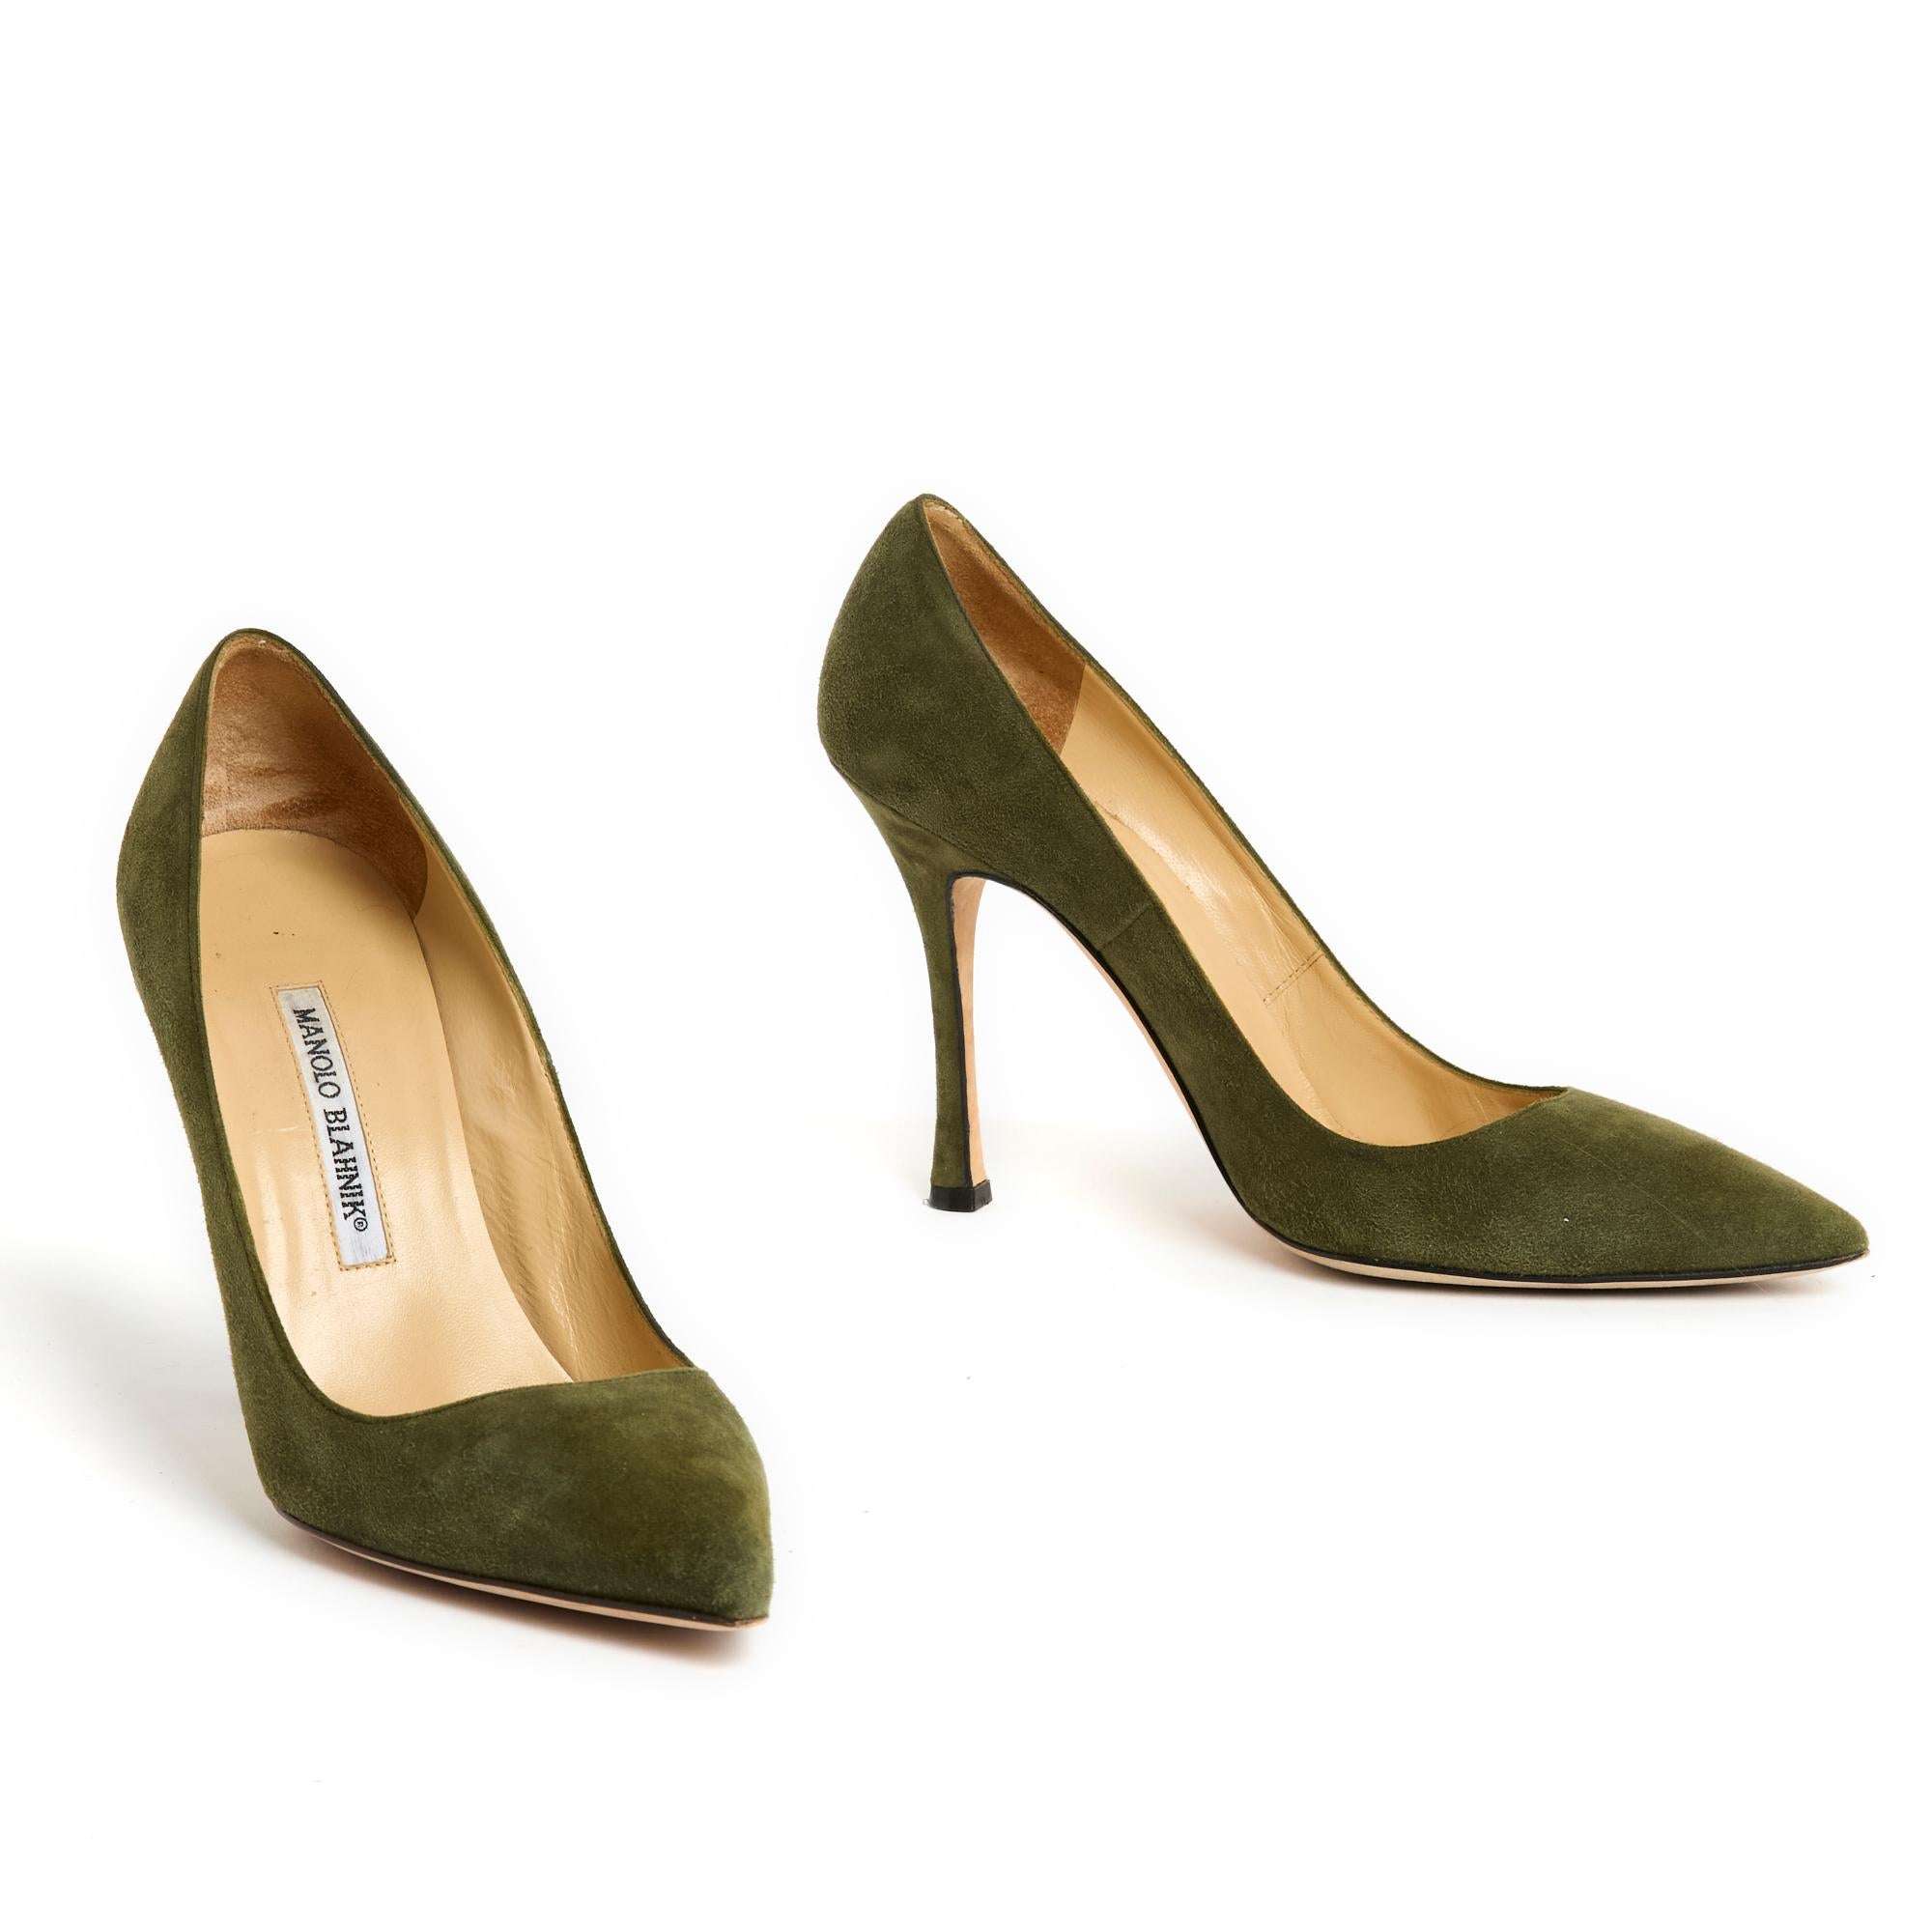 Manolo Blahnik pumps in khaki green suede, pointed toe, stiletto heel. Size 39EU i.e. UK 5.5 and US 7.5, heel 11 cm, insole 25 cm. The pumps have been worn only once and they are in perfect condition, magnificent on the feet...